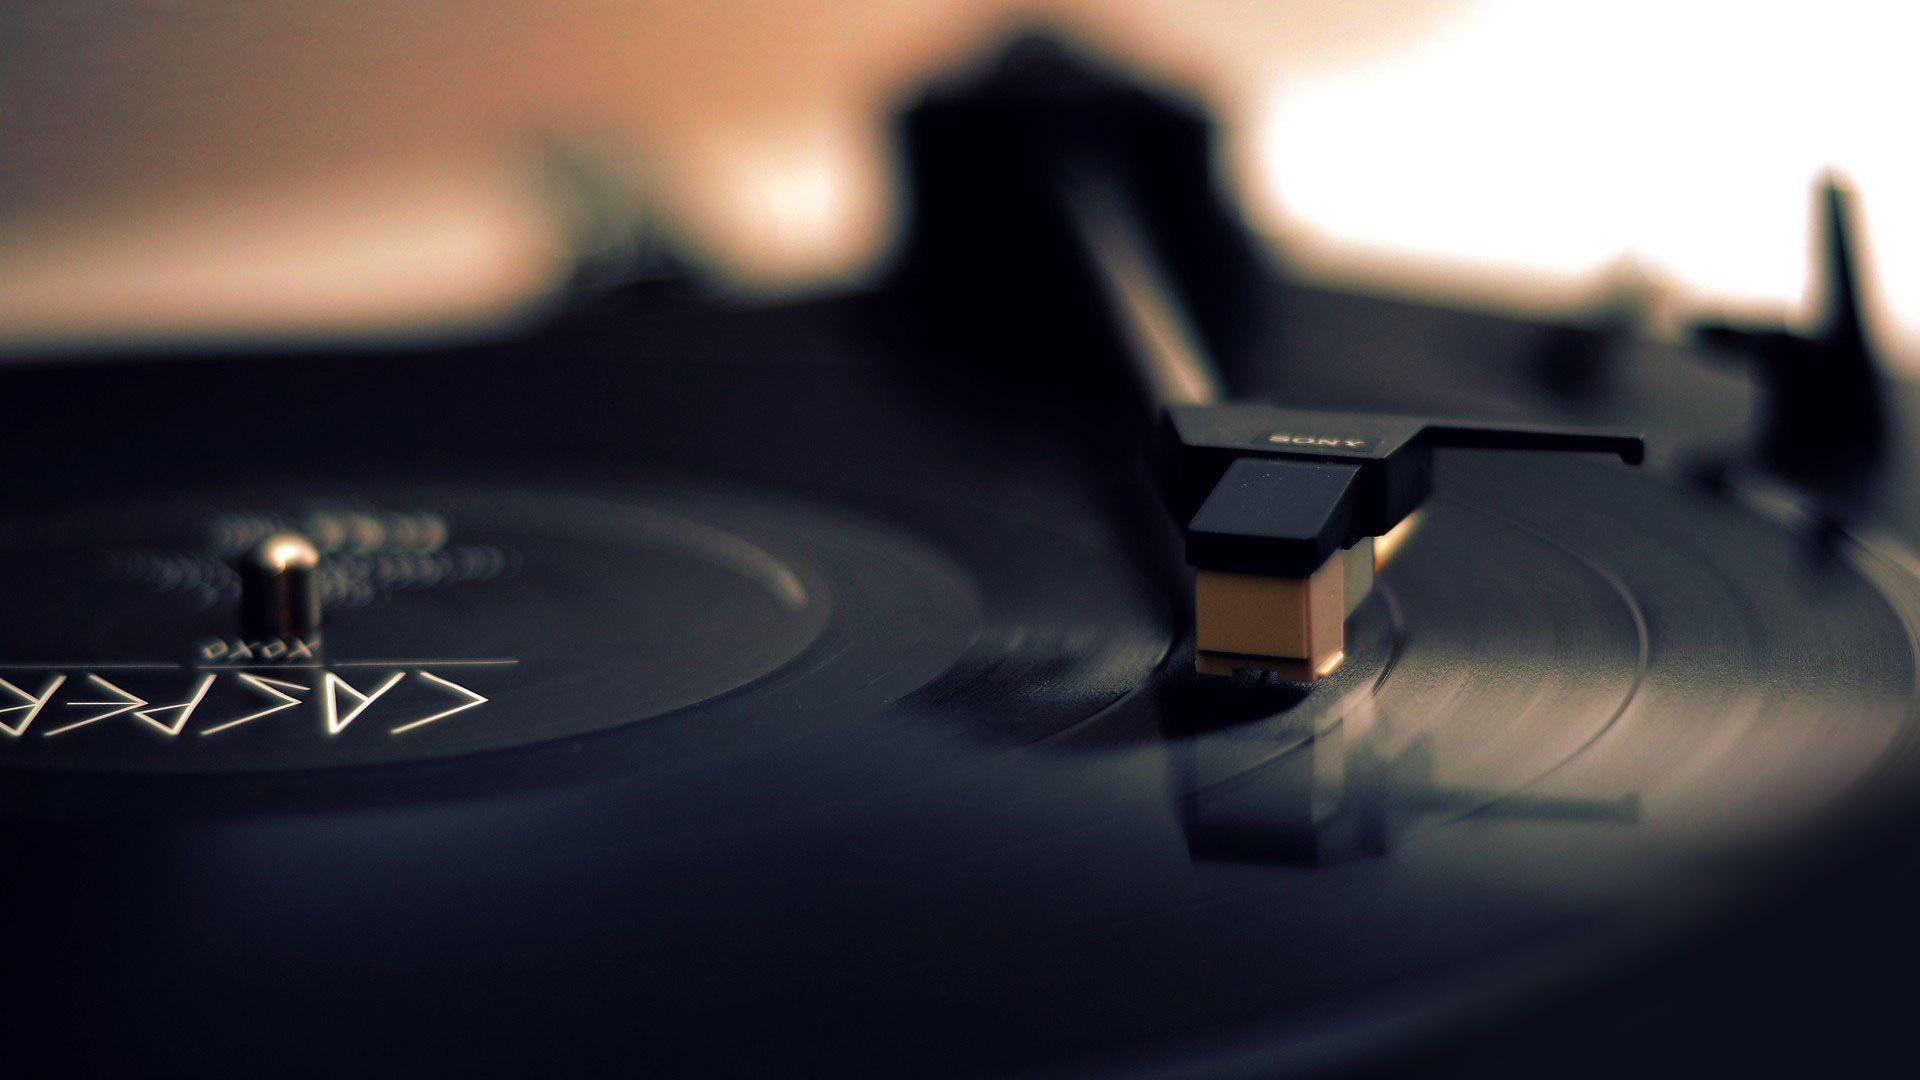 Turntable Photos Download The BEST Free Turntable Stock Photos  HD Images